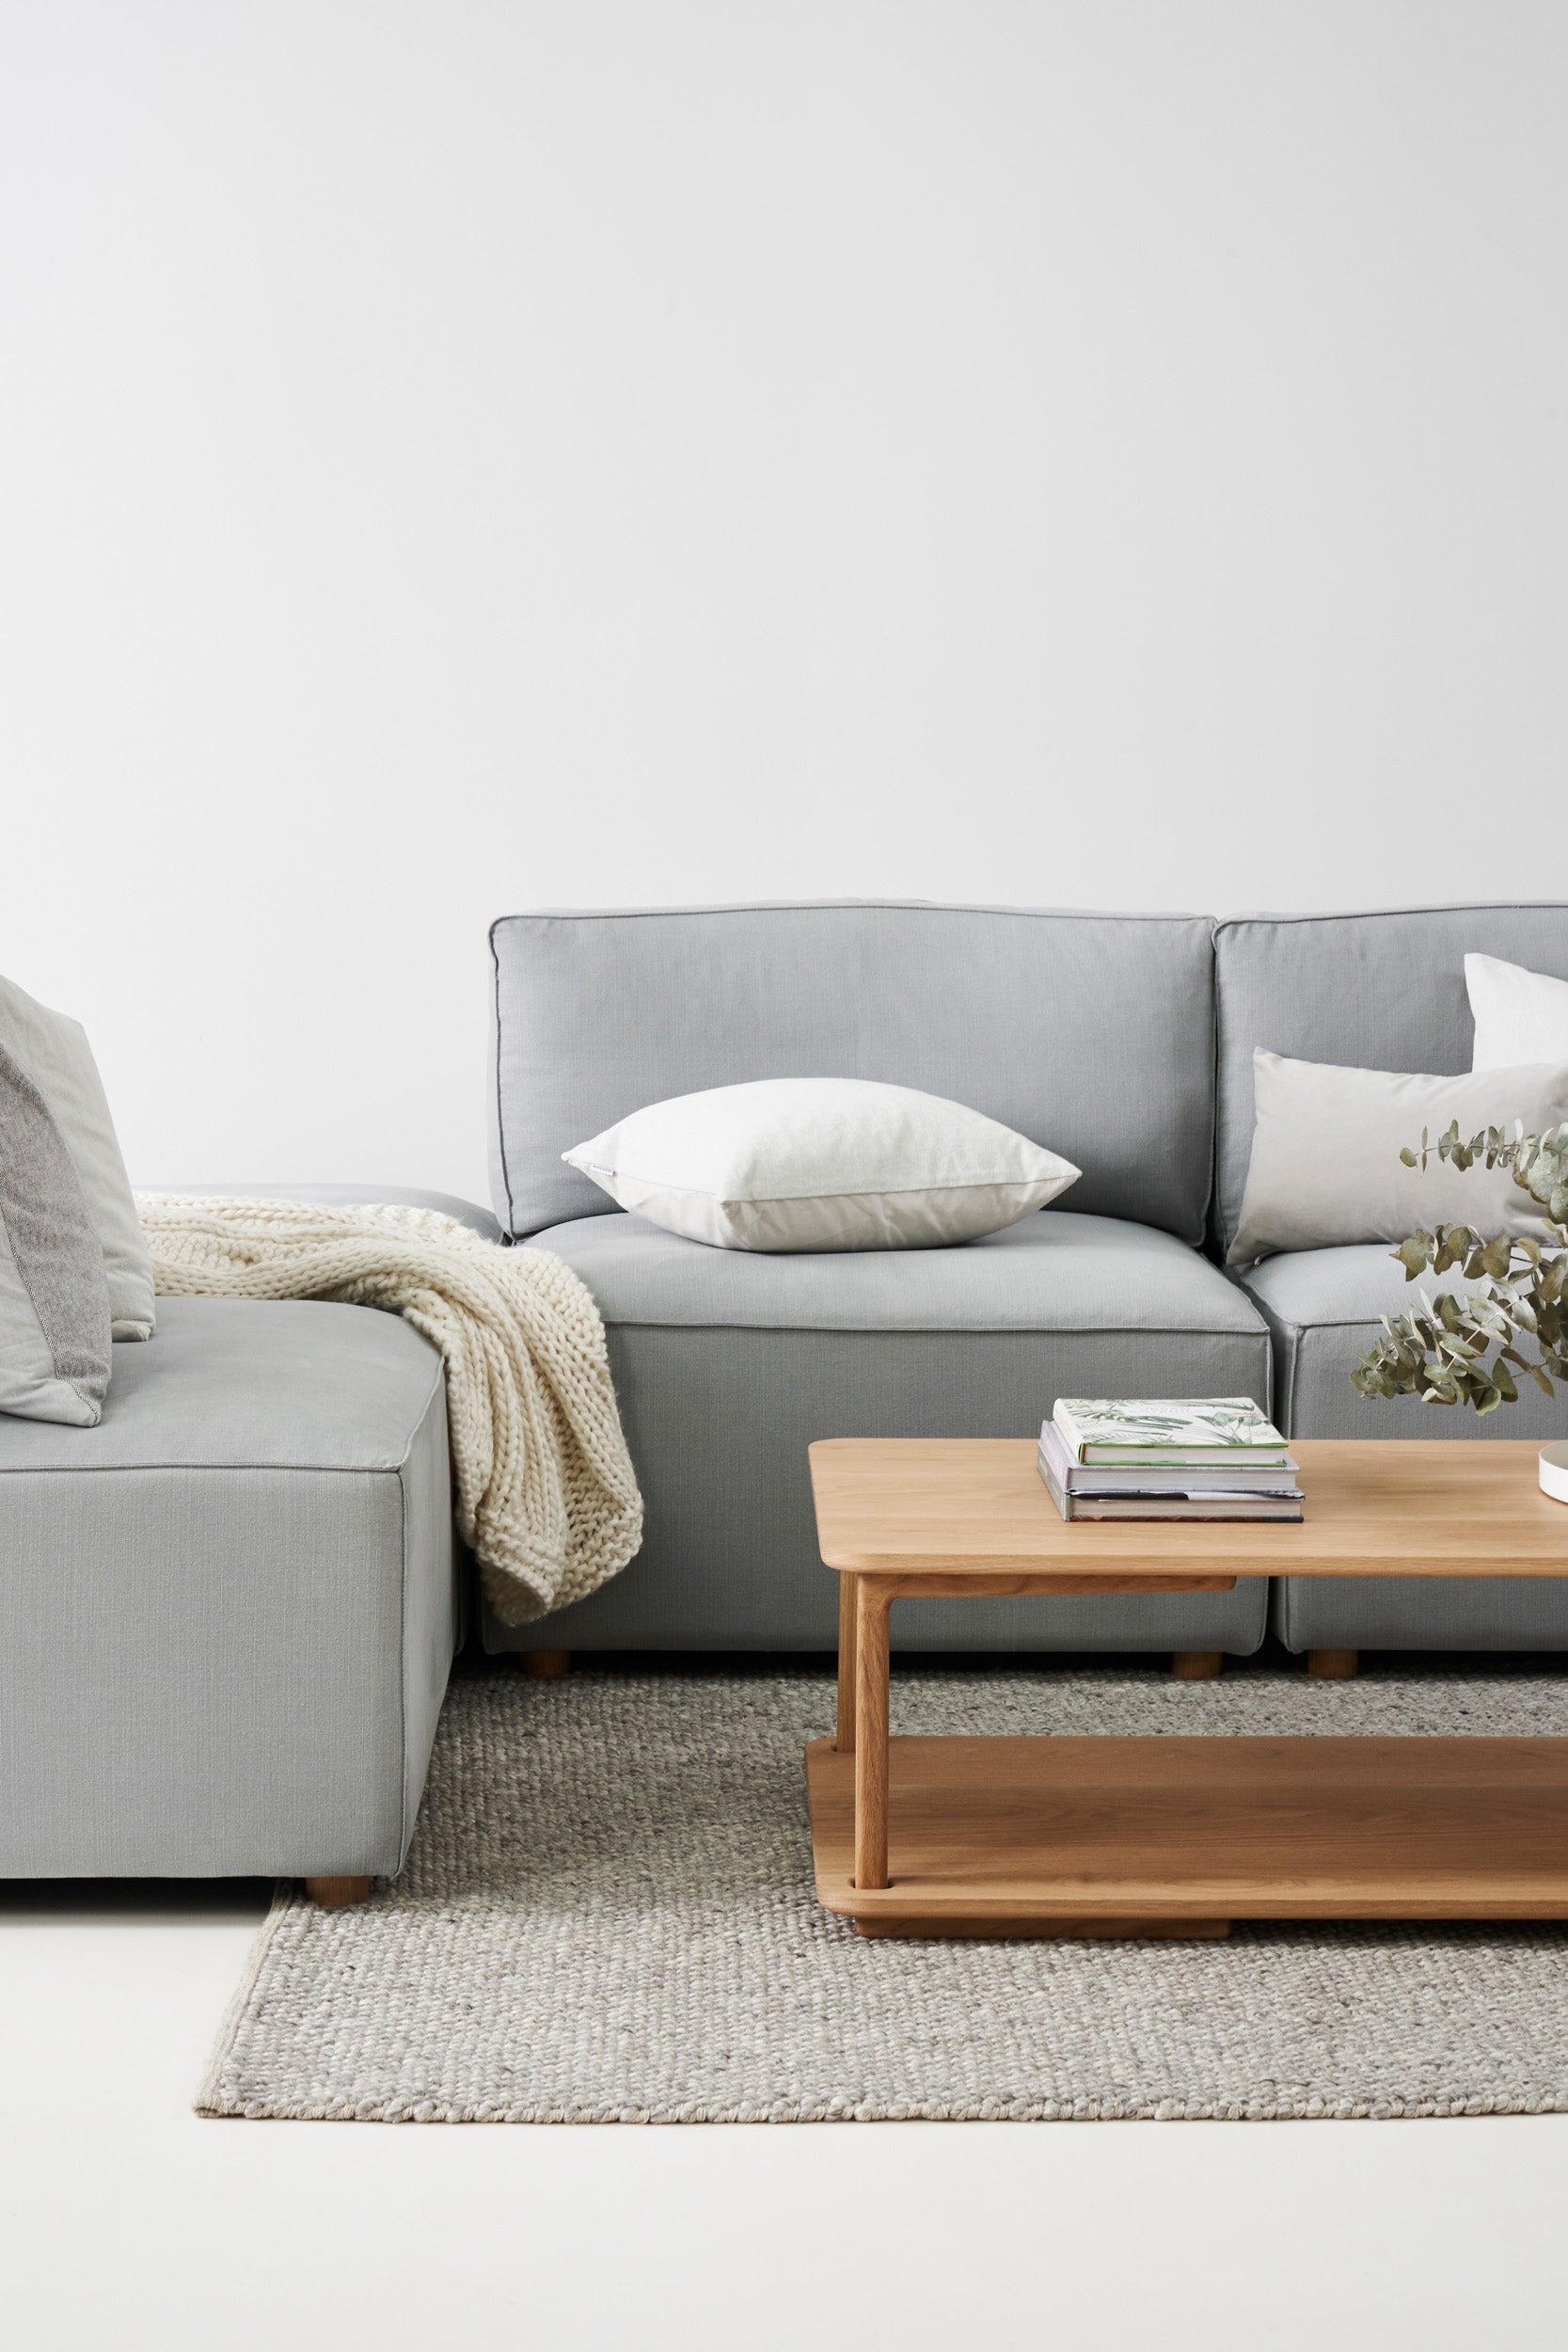 Seven Ways to Nordic-ise Your Home